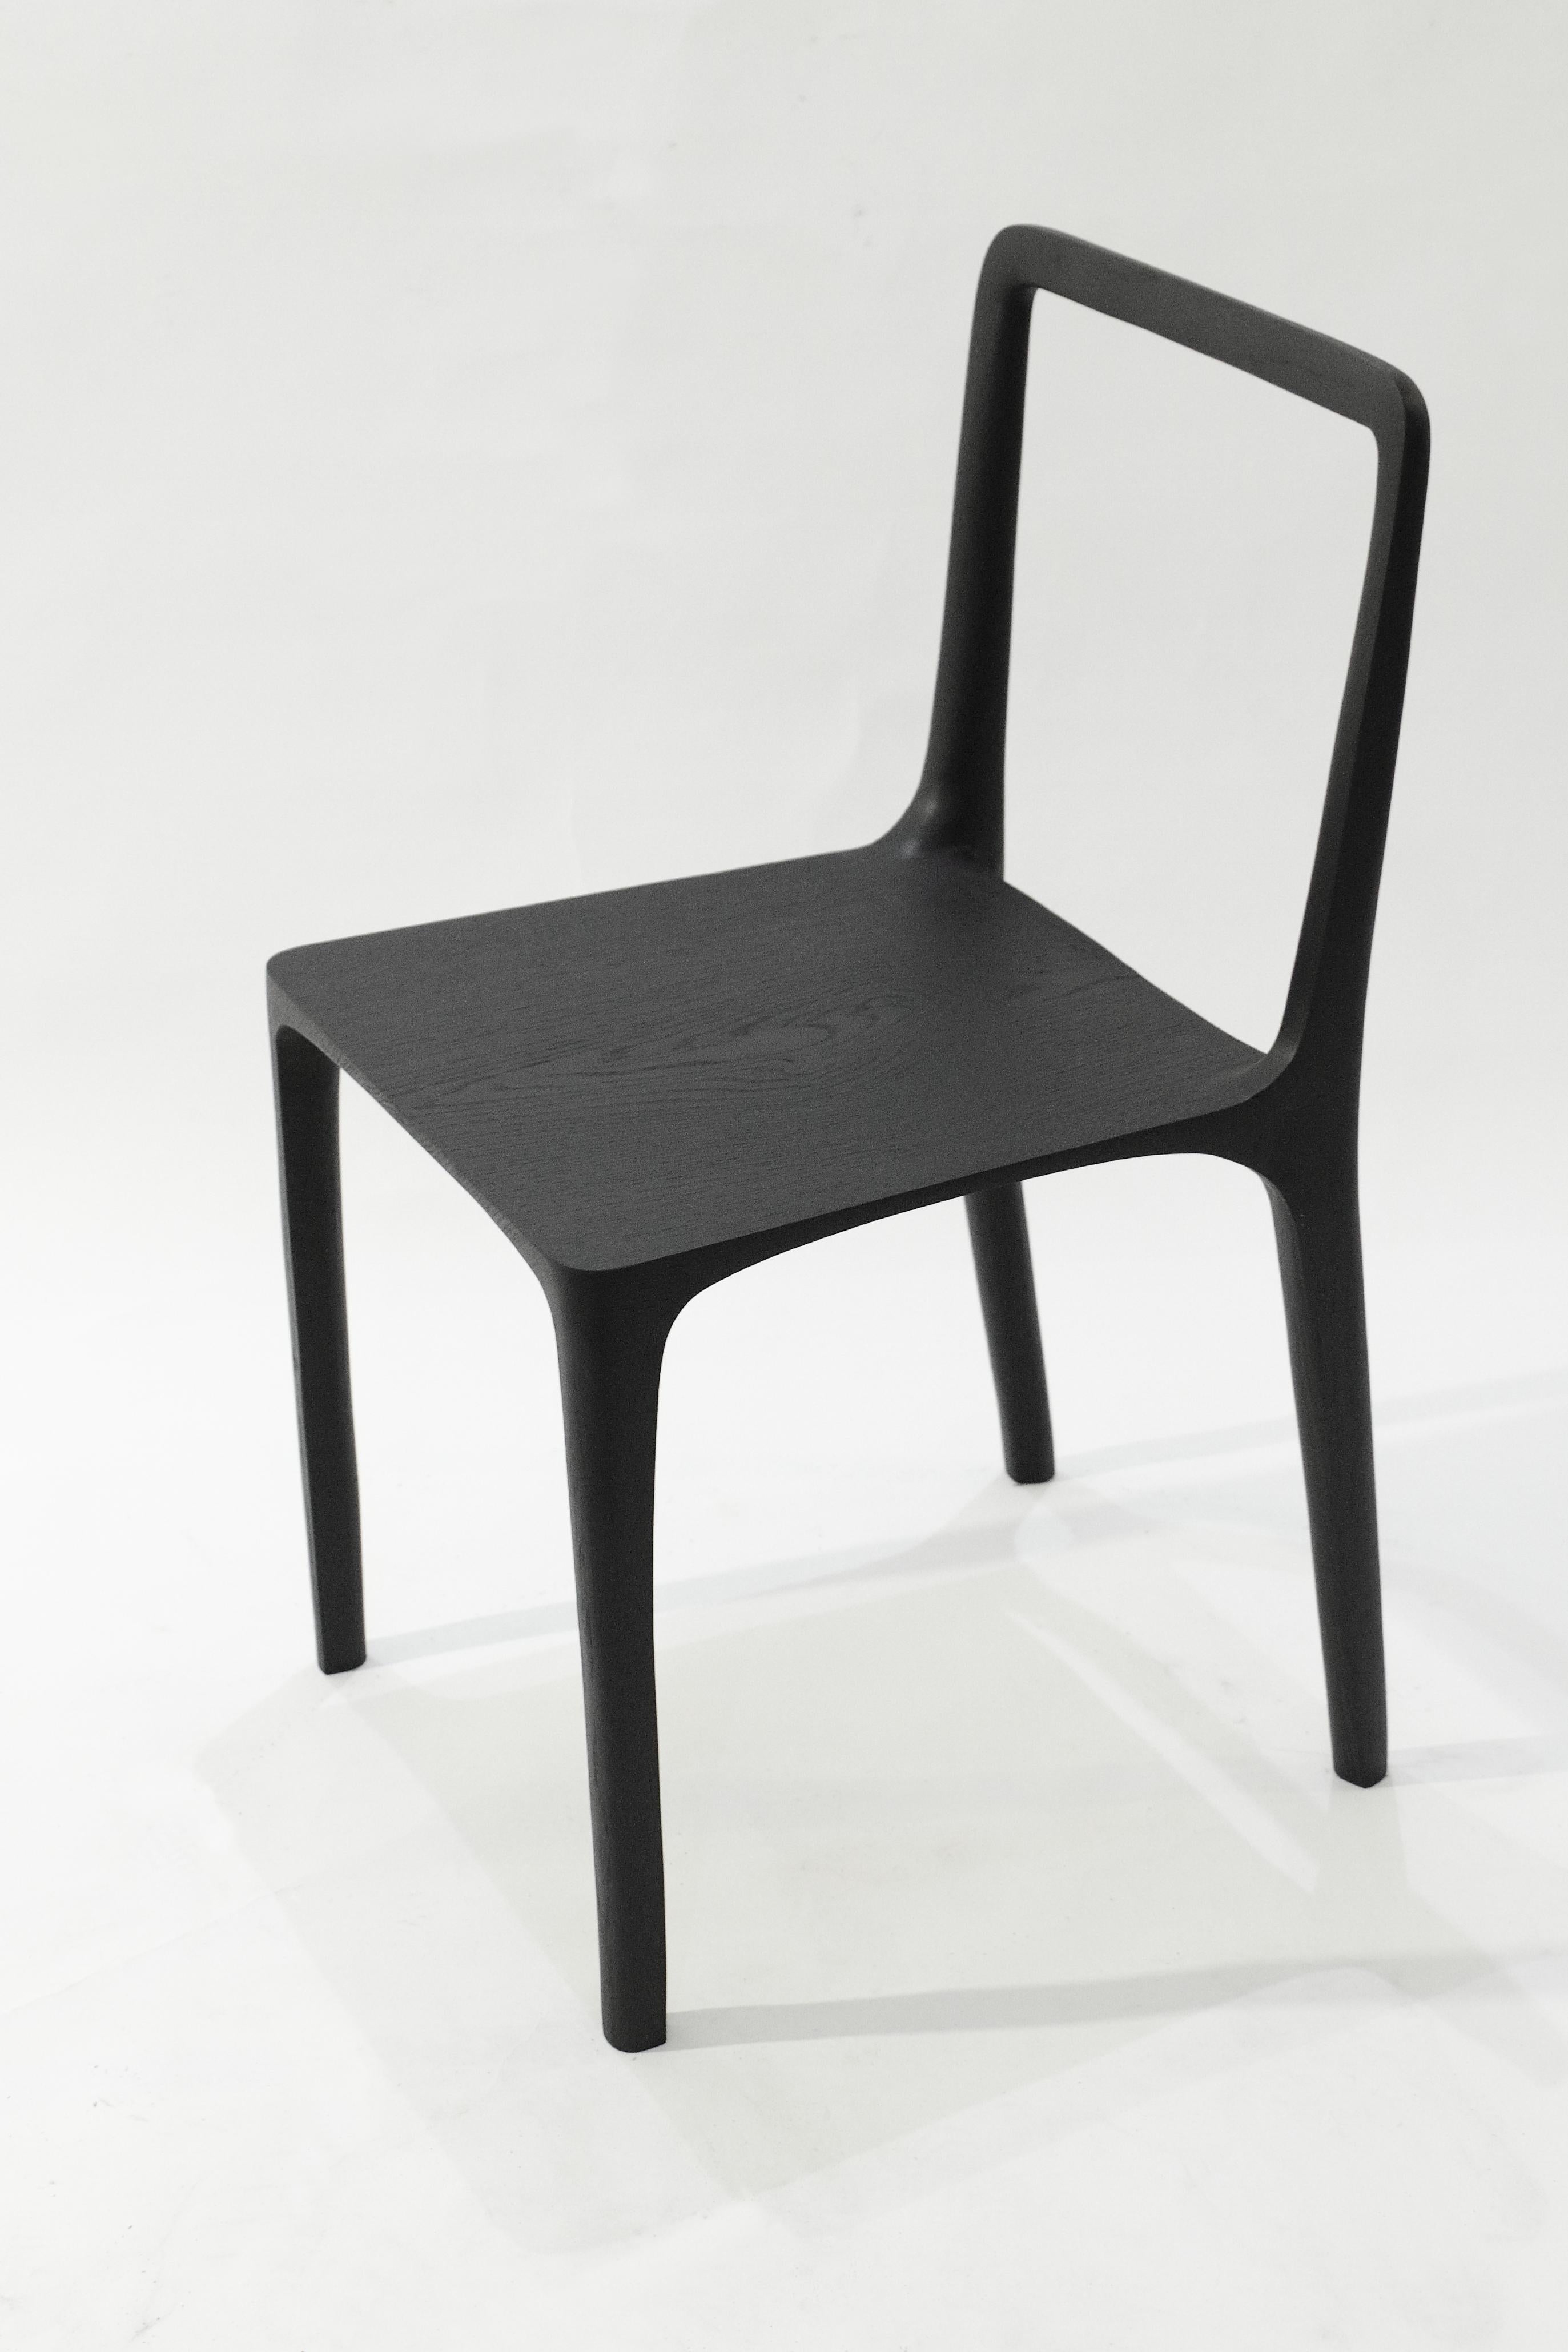 Dot chair, hand-sculpted and signed by Cedric Breisacher
Hand-sculpted and signed by Cedric Breisacher
Dimension: H 46/80 cm x P 44 cm x L42 cm
Solid oak
Can be made to order in other dimensions and finishes.

Designer-sculptor, Cedric